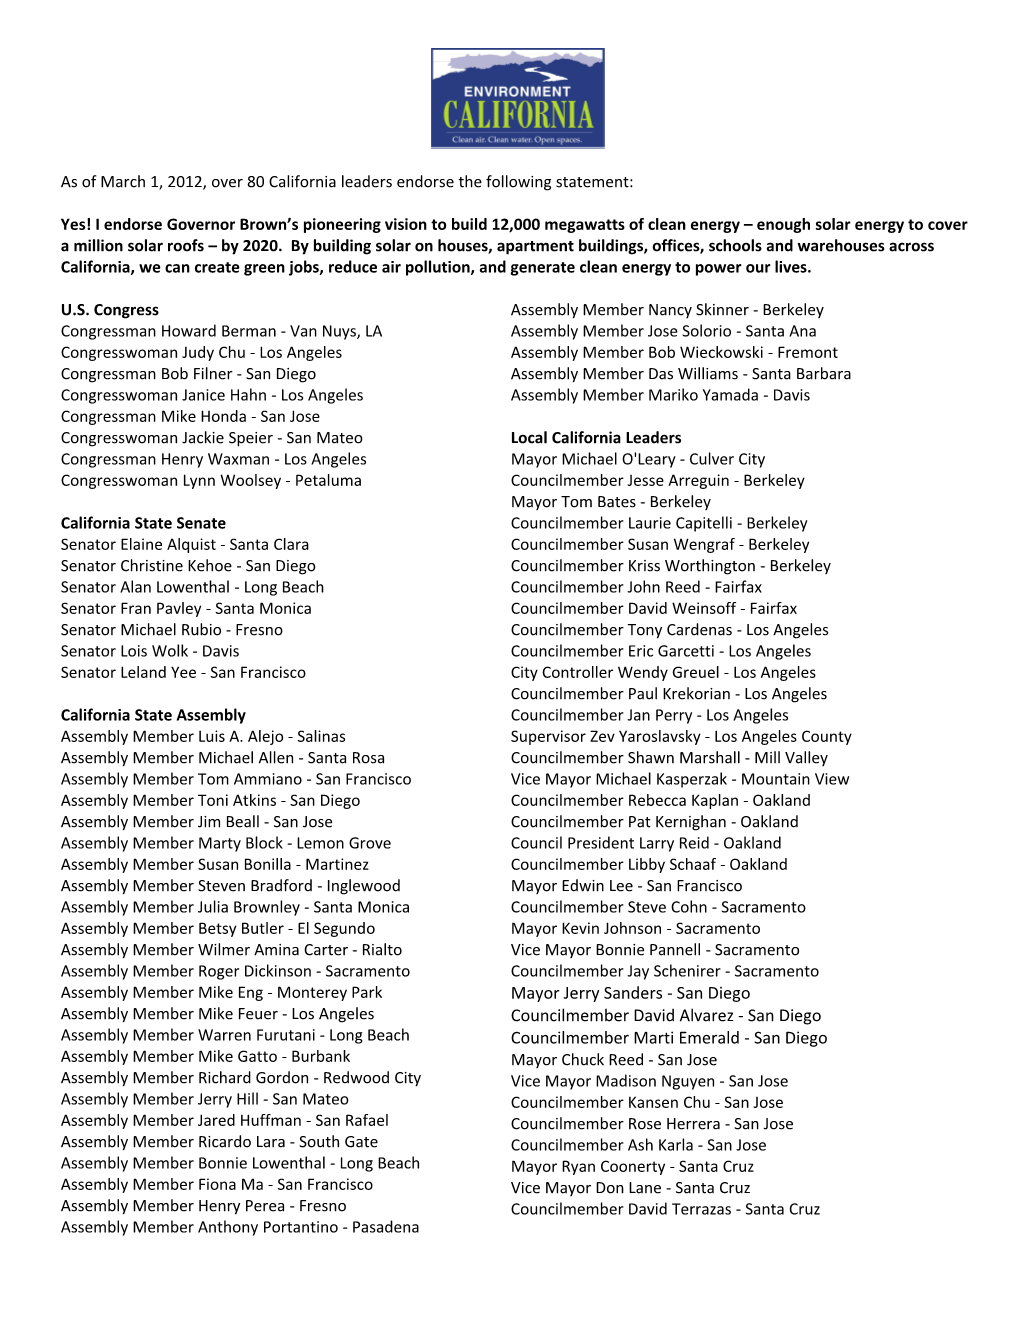 As of March 1, 2012, Over 80 California Leaders Endorse the Following Statement